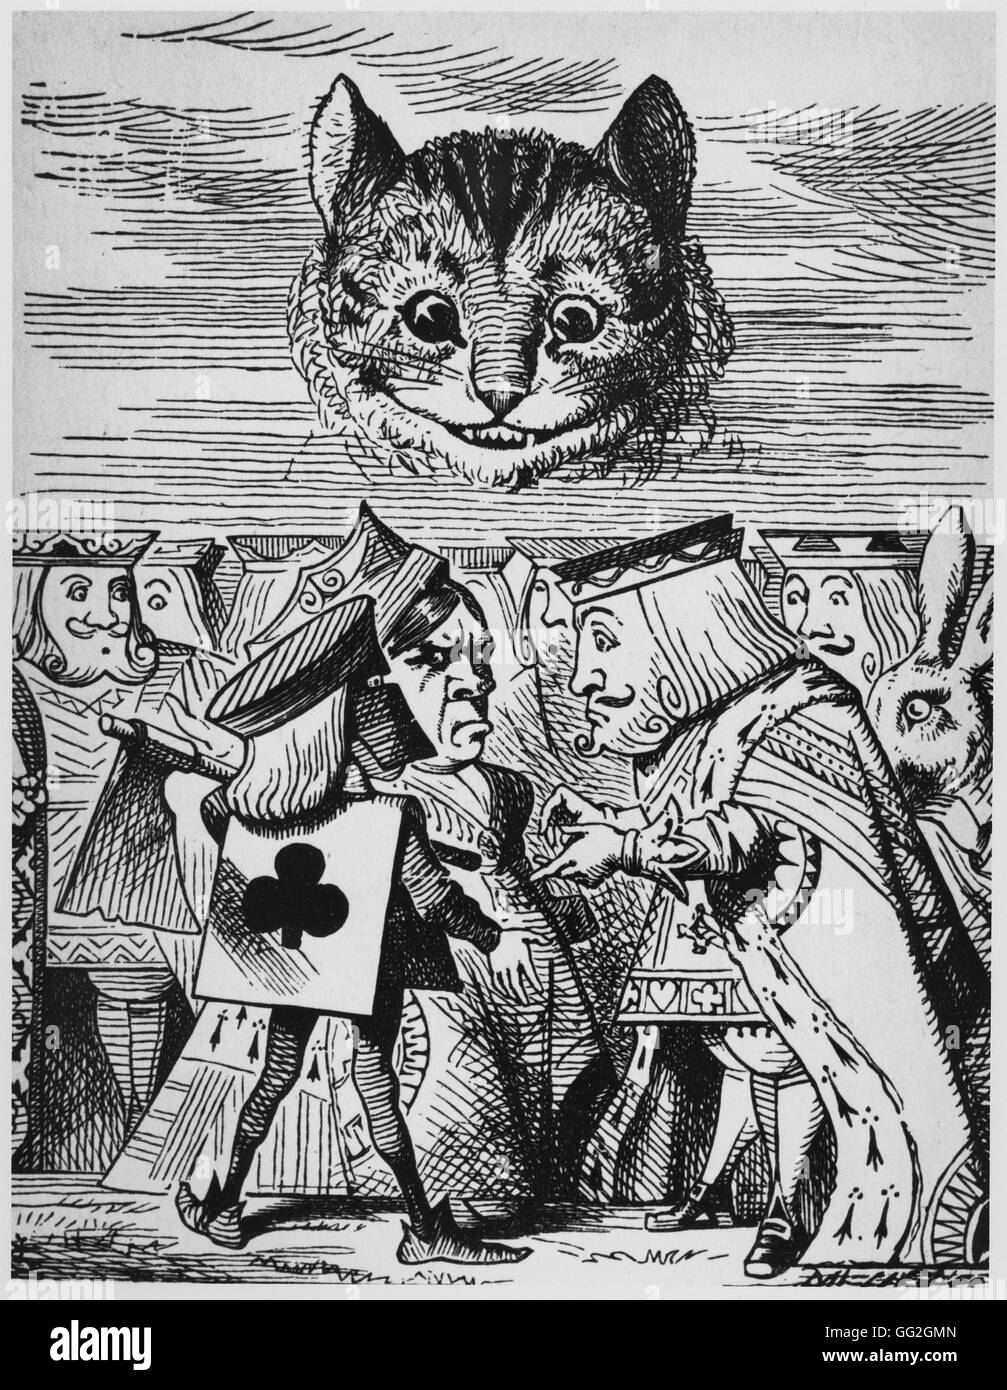 Illustration by Sir John Tenniel Alice in Wonderland, by Lewis Carroll London, MacMilllan, 1865  Executioner argues with King about cutting off Cheshire Cat's head Stock Photo